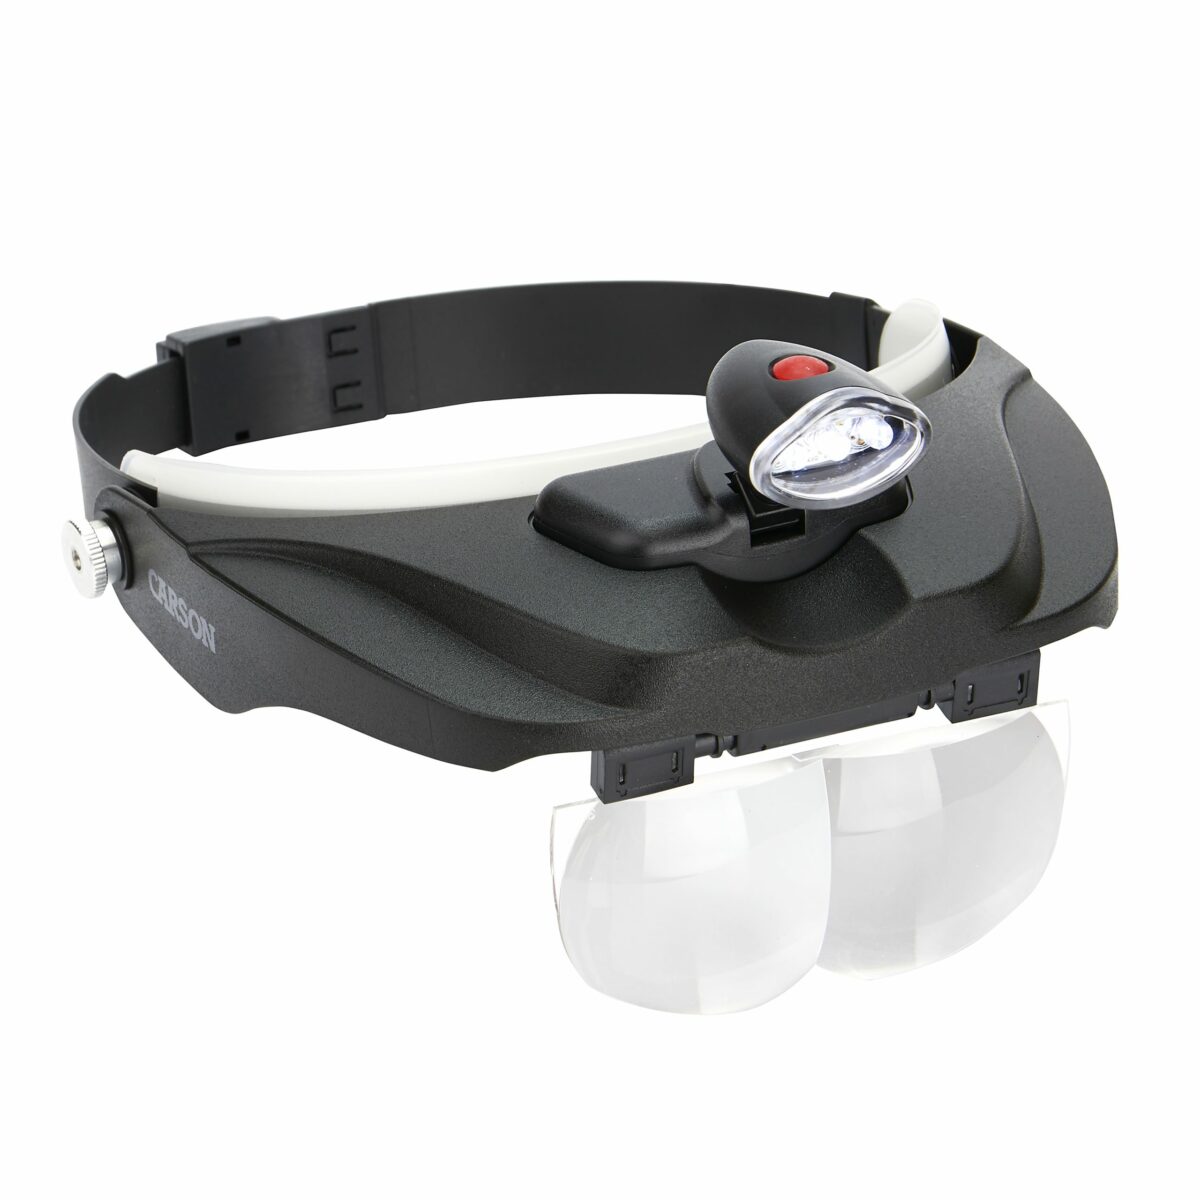 PRO Series MagniVisor™ Deluxe Head-Worn LED Magnifier with 4 Lenses